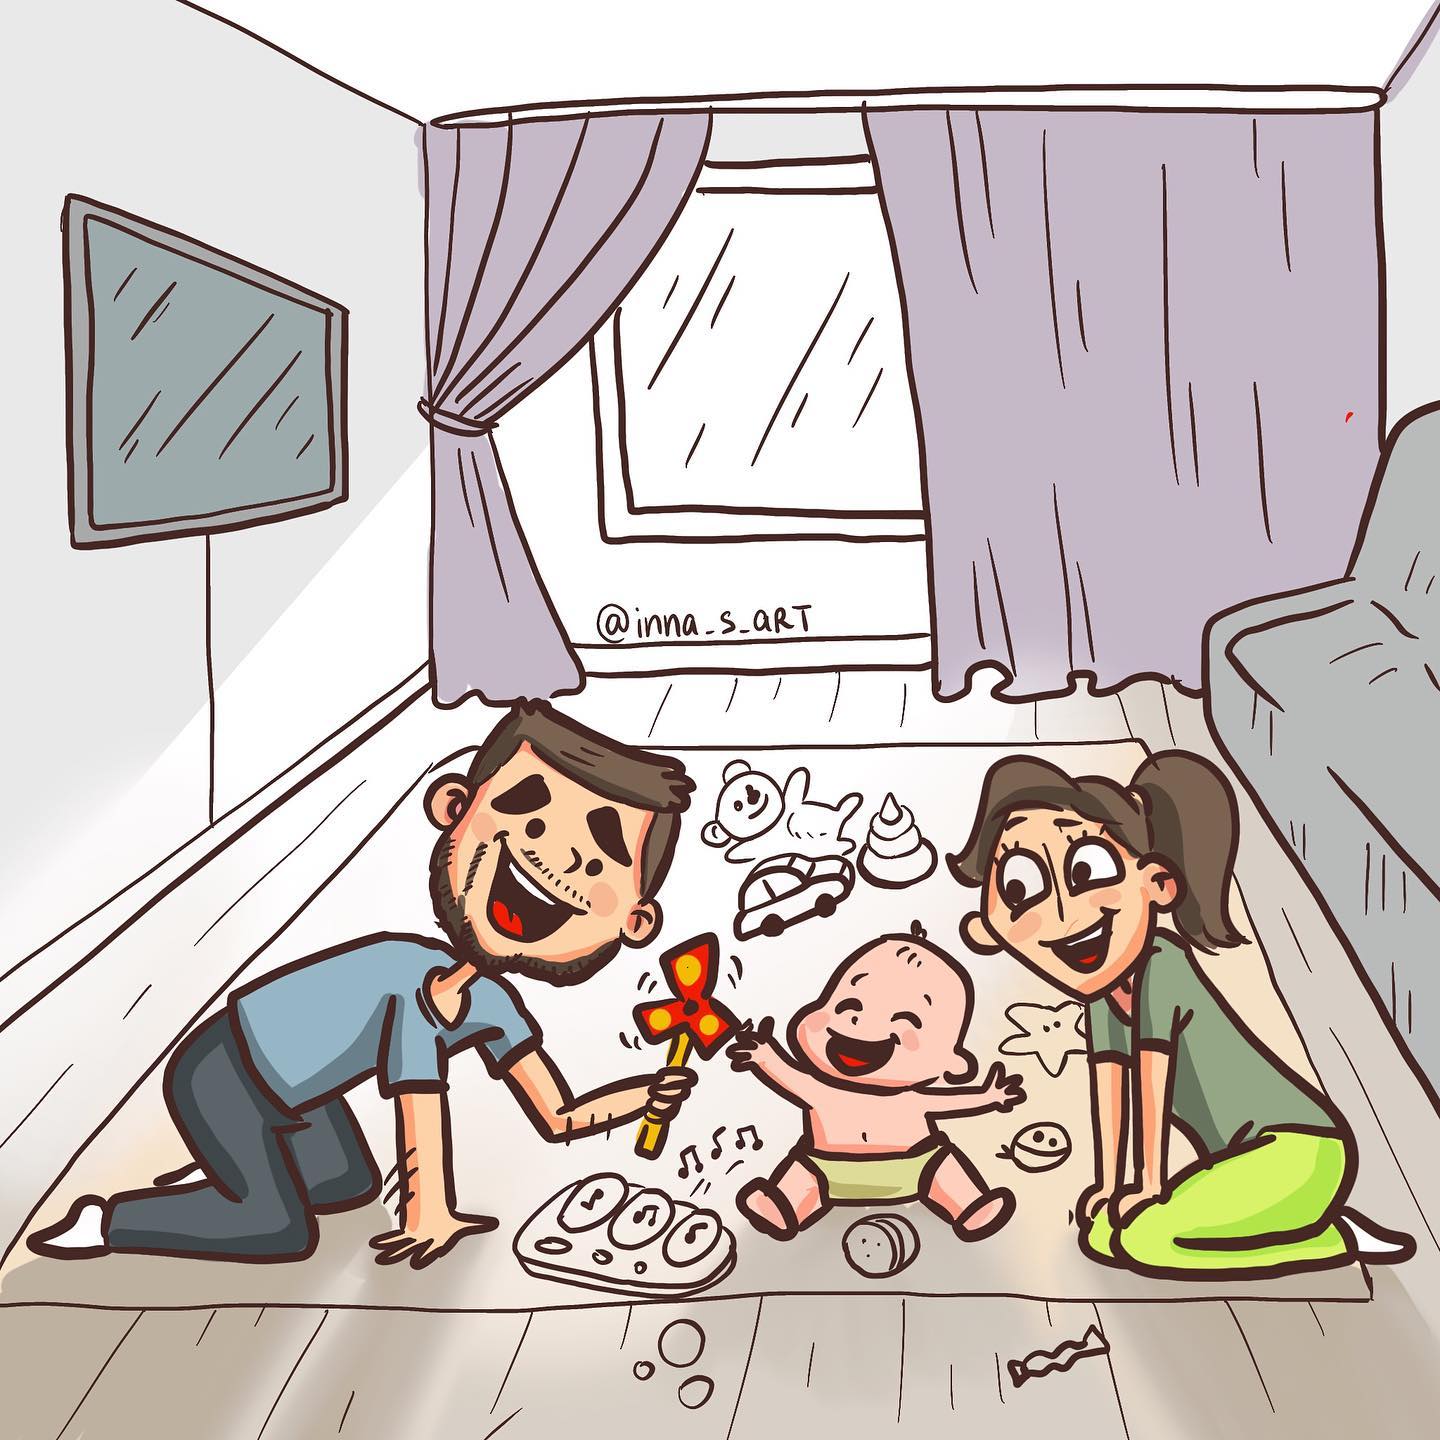 comics about mom and dad playing with their baby